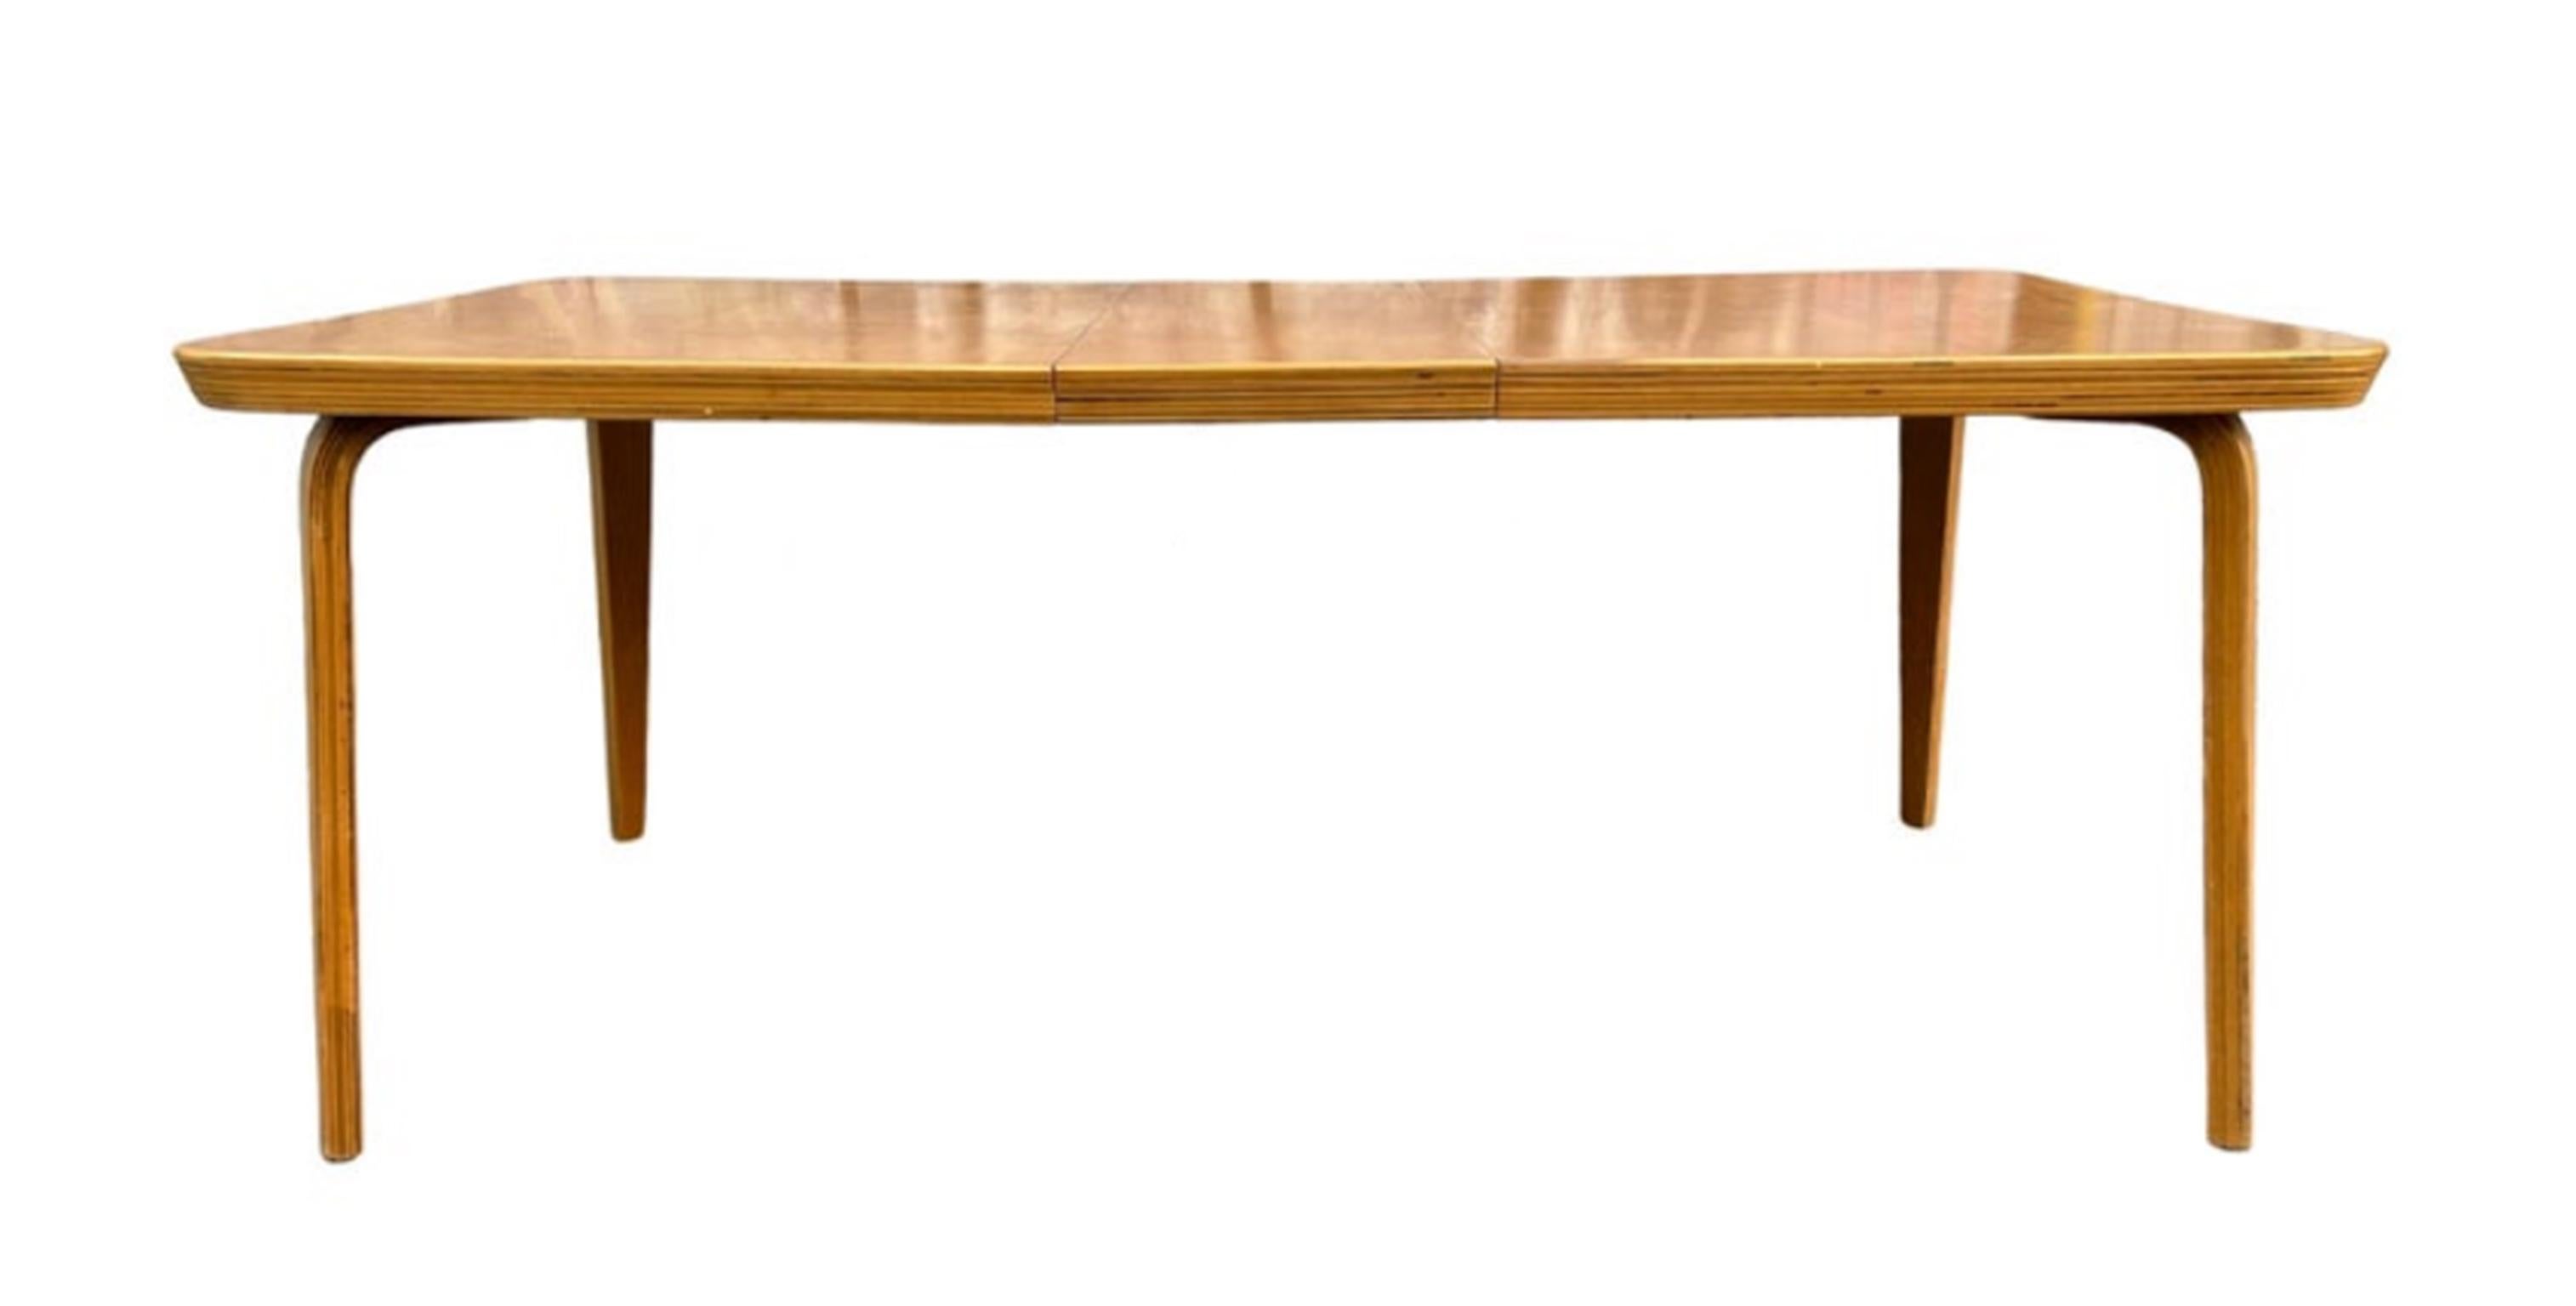 Midcentury Unique Birch rounded corner extension dining table with 1 leaf. All blonde birch with steamed bentwood legs. Original blonde finish in great vintage condition. Very well built solid Dining table. Style of Alvar Aalto / Thonet. Located In